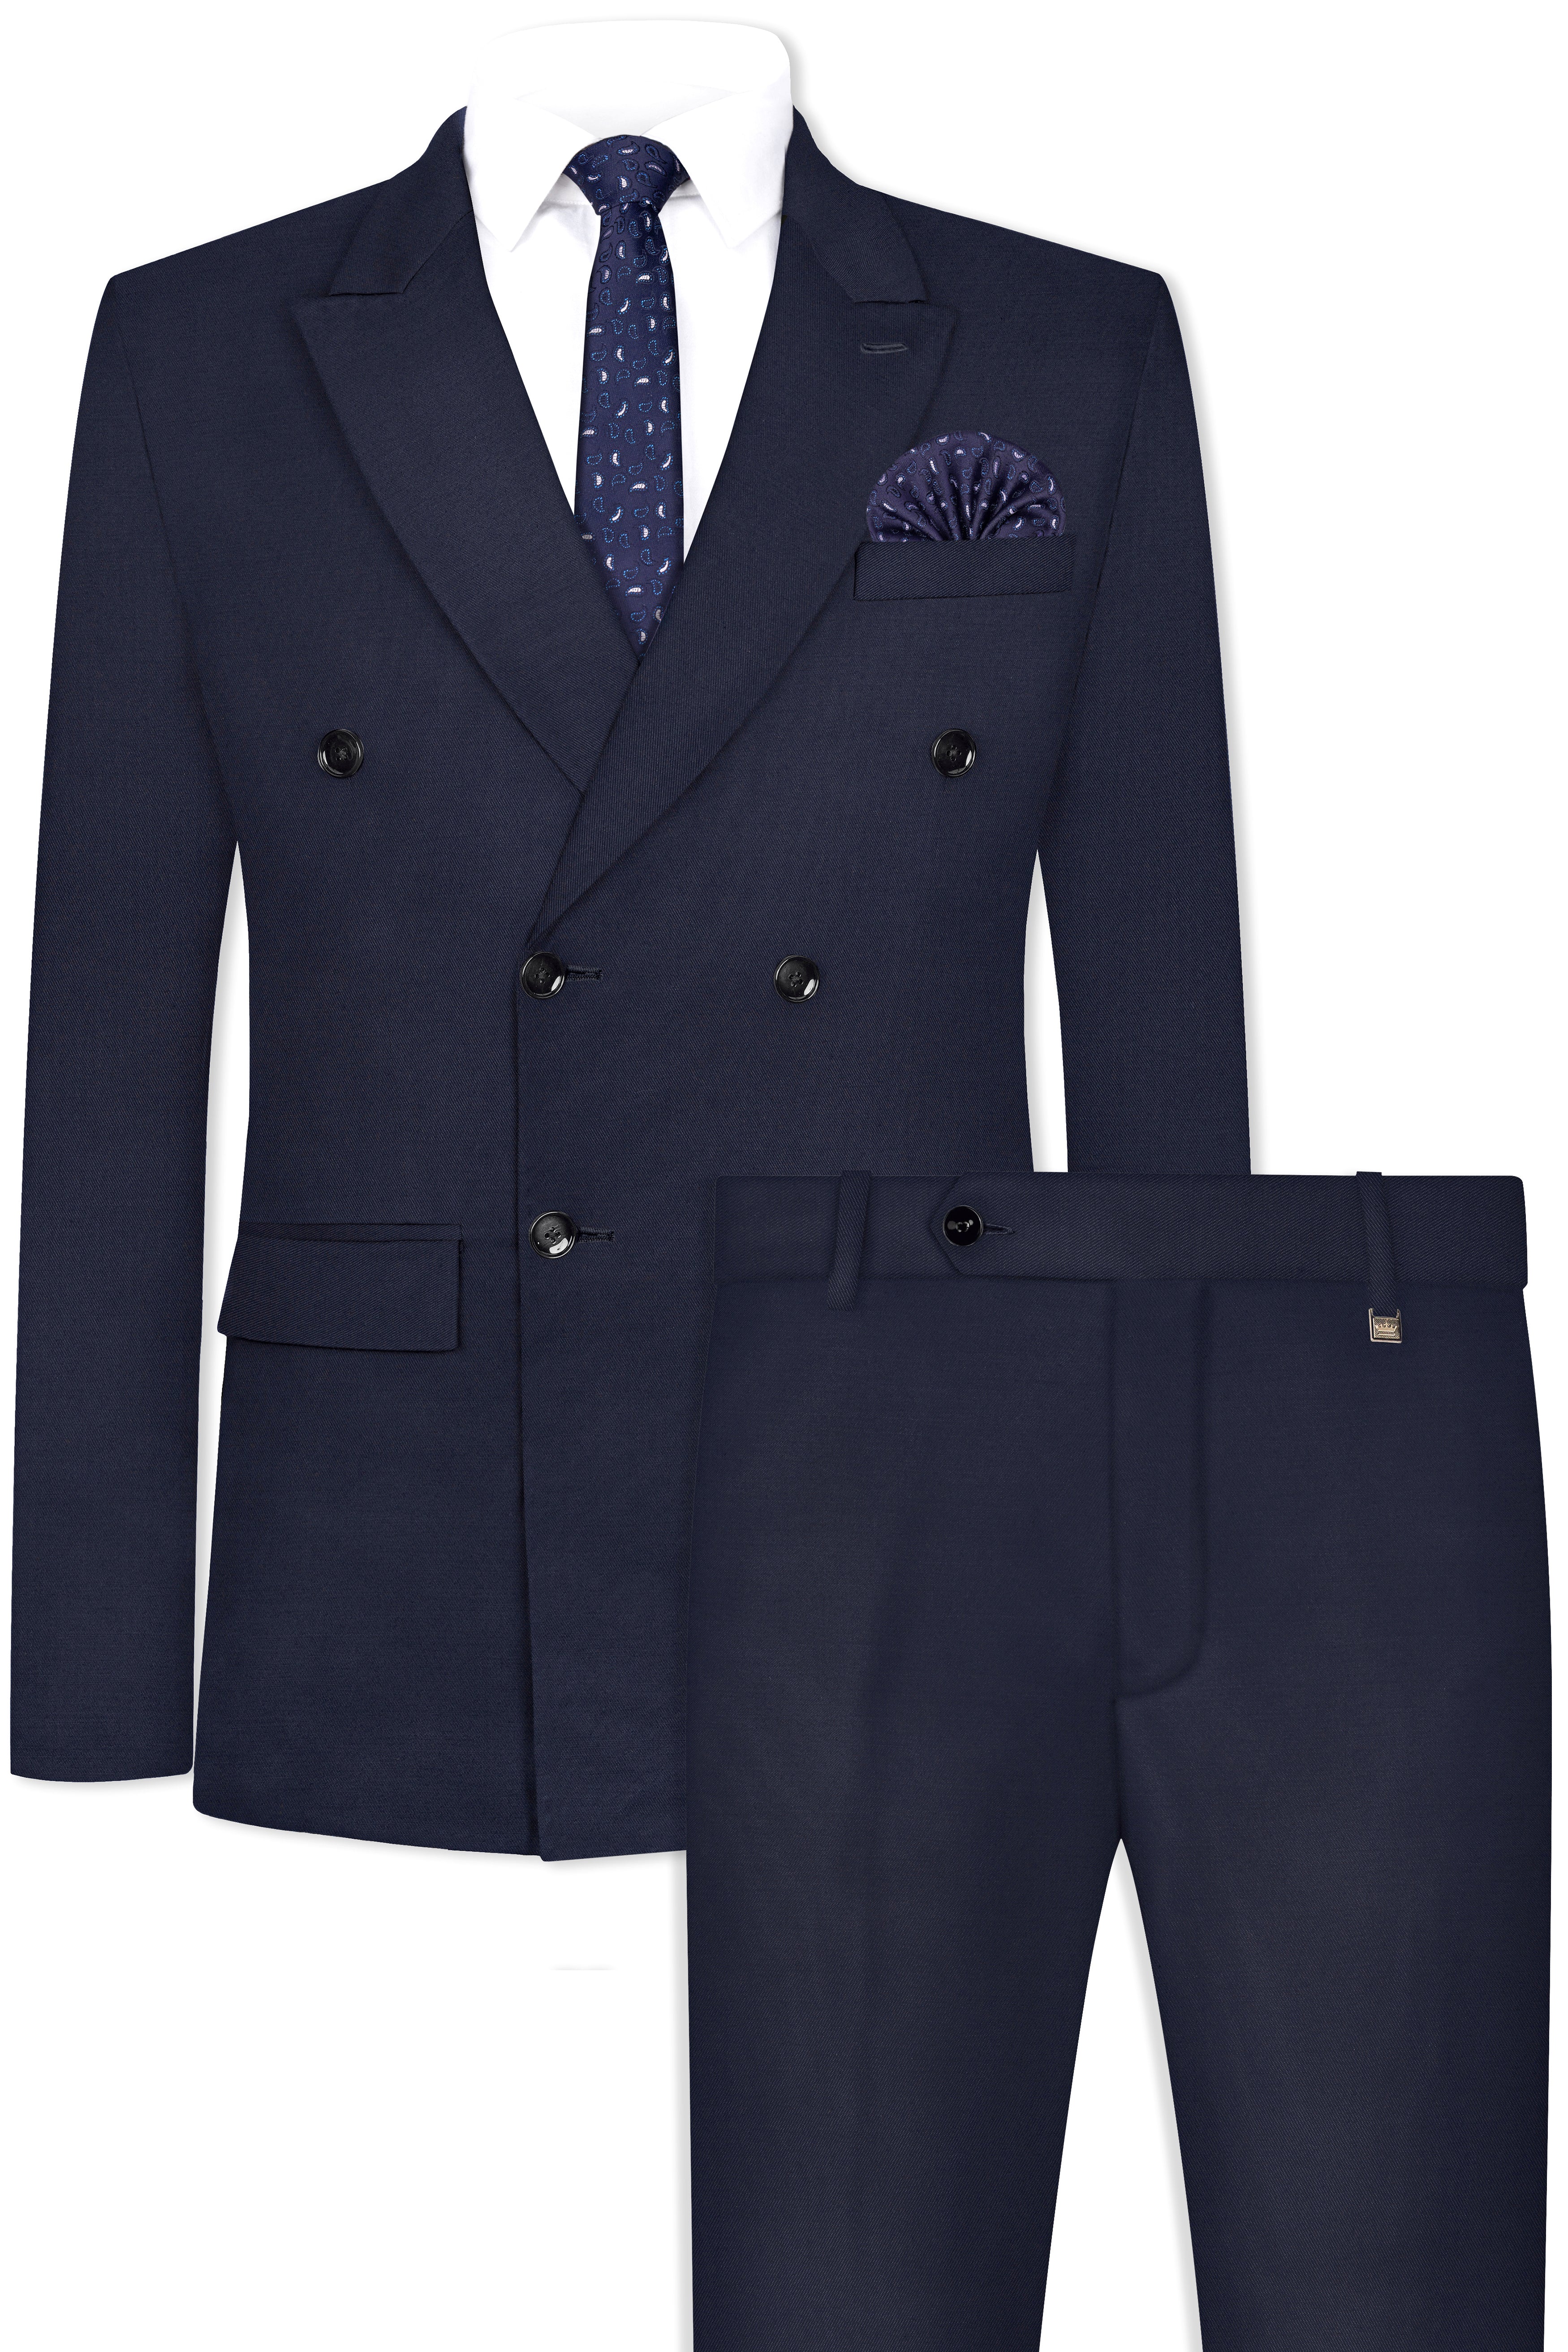 Vulcan Blue Plain Solid Wool Blend Double Breasted Suit